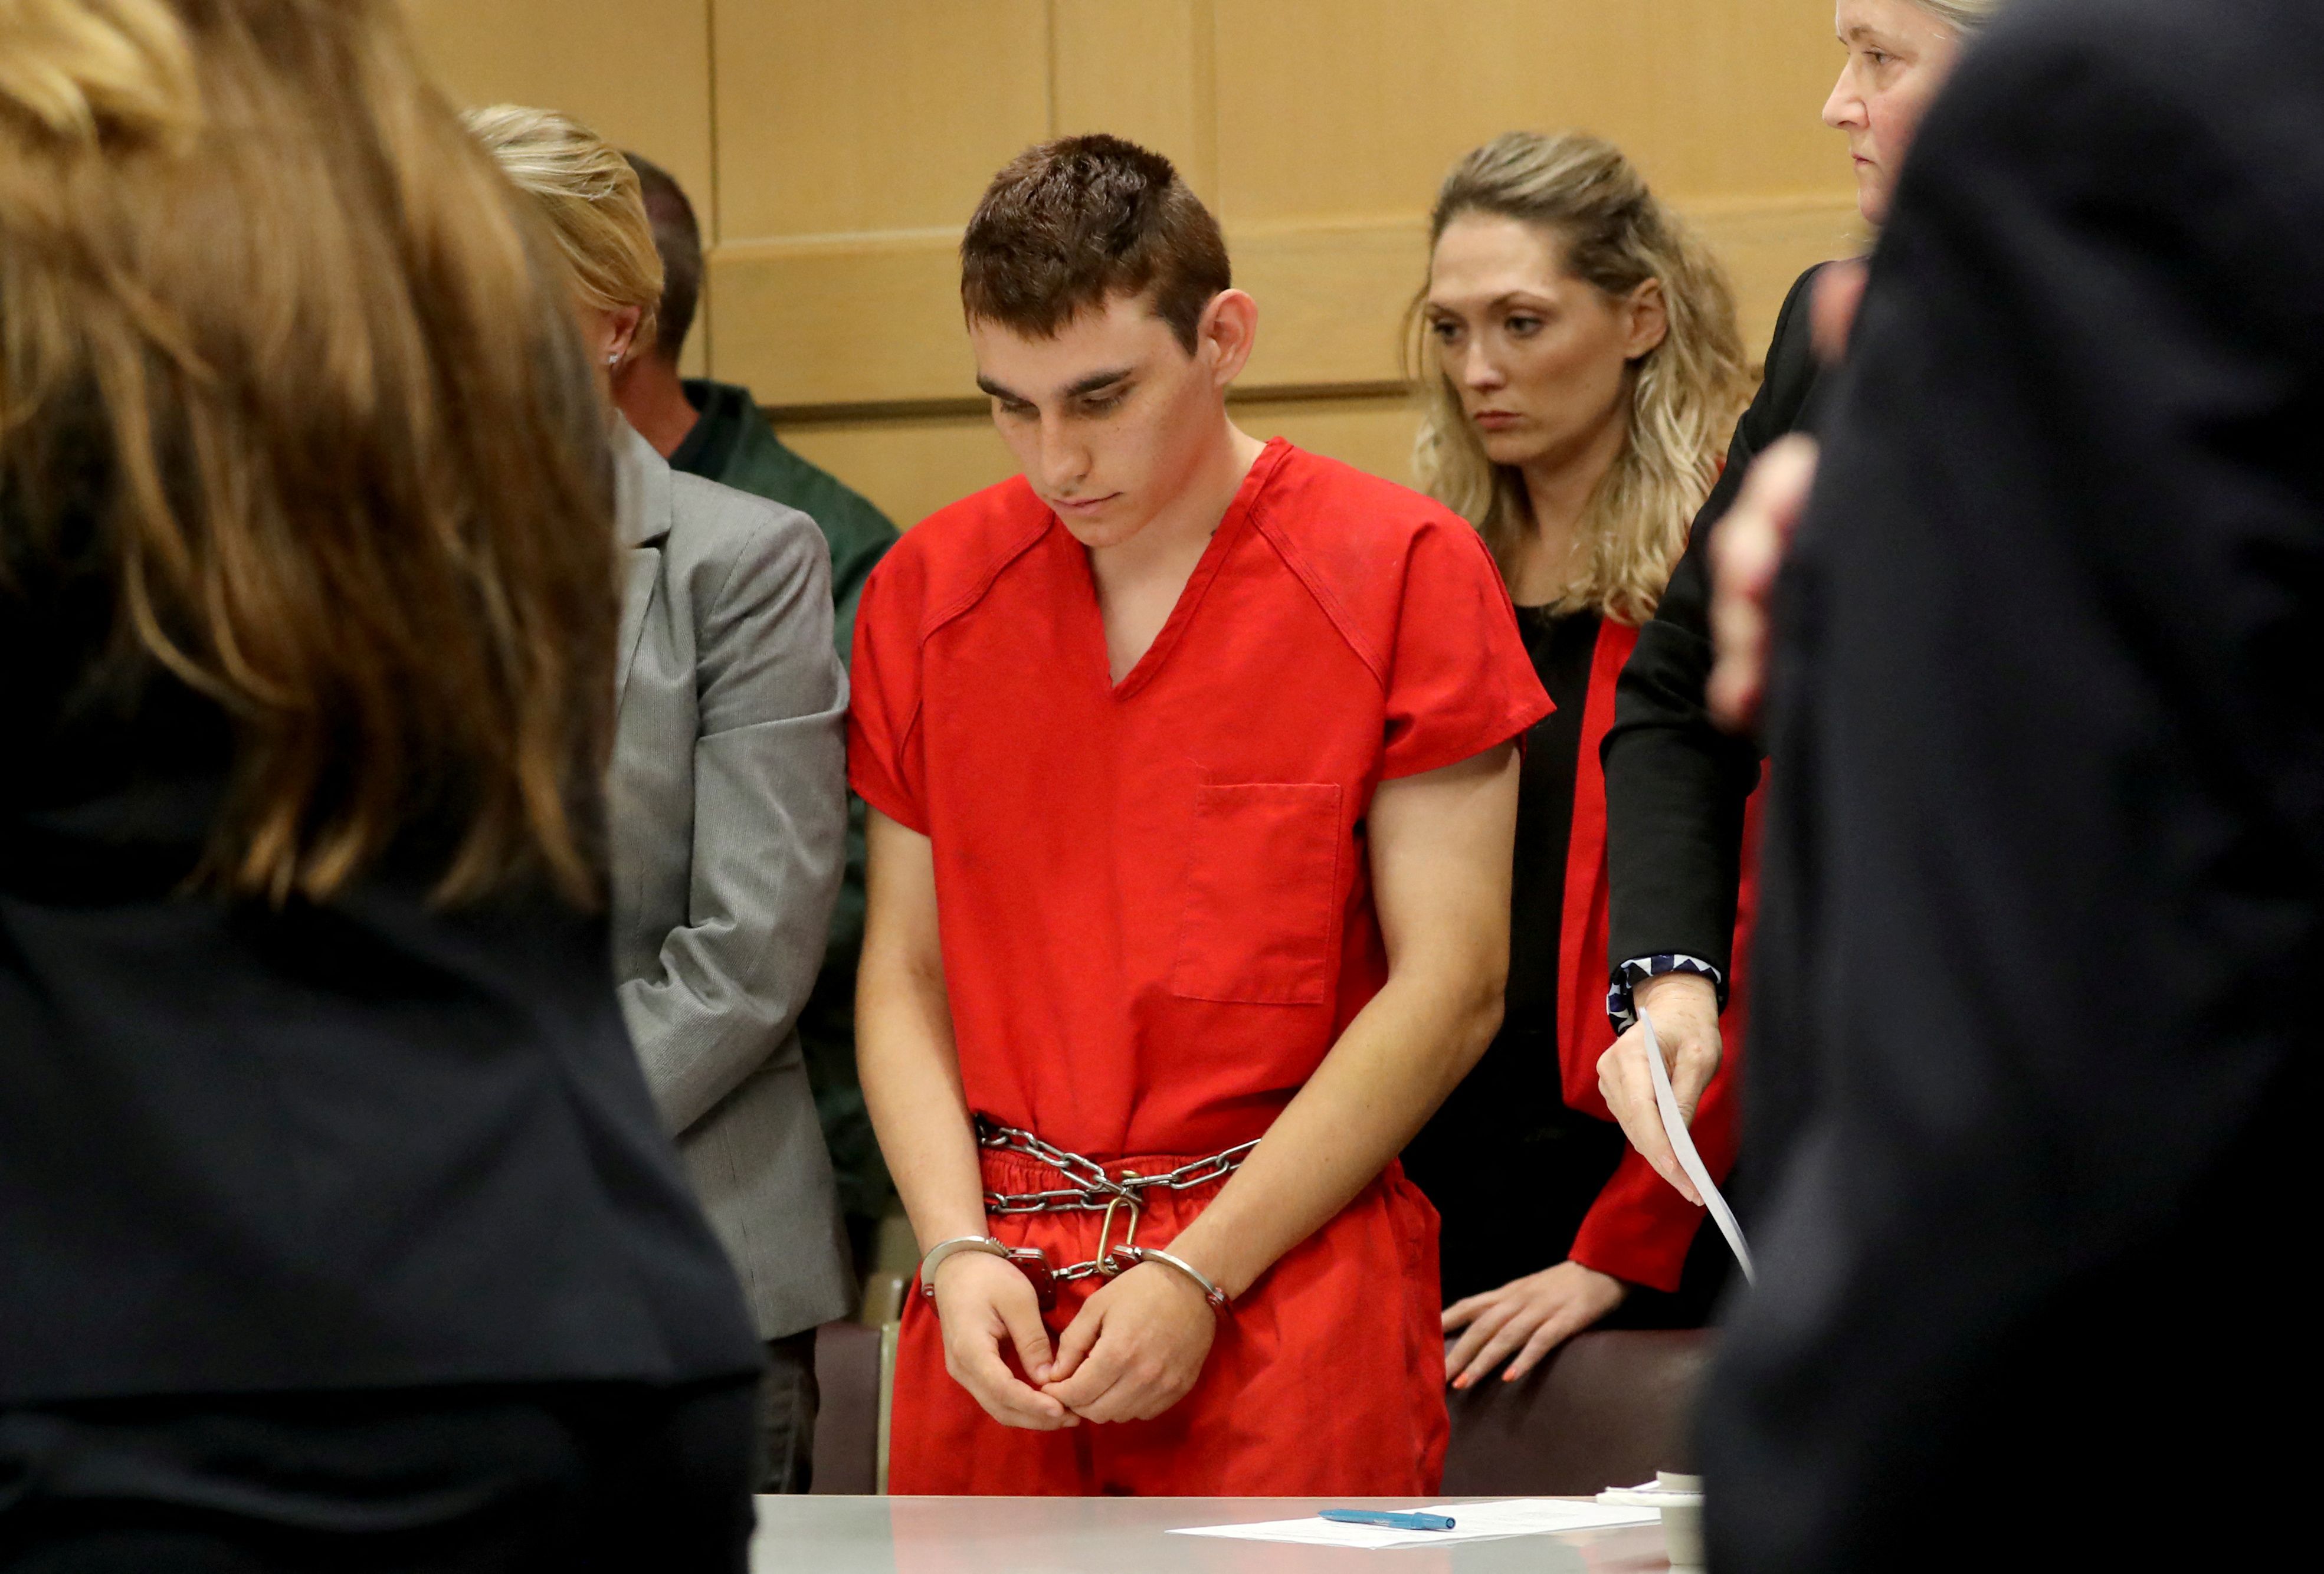 FILE PHOTO: Nikolas Cruz, facing 17 charges of premeditated murder in the mass shooting at Marjory Stoneman Douglas High School in Parkland, appears in court for a status hearing in Fort Lauderdale, Florida, U.S. February 19, 2018. REUTERS/Mike Stocker/Pool/File Photo